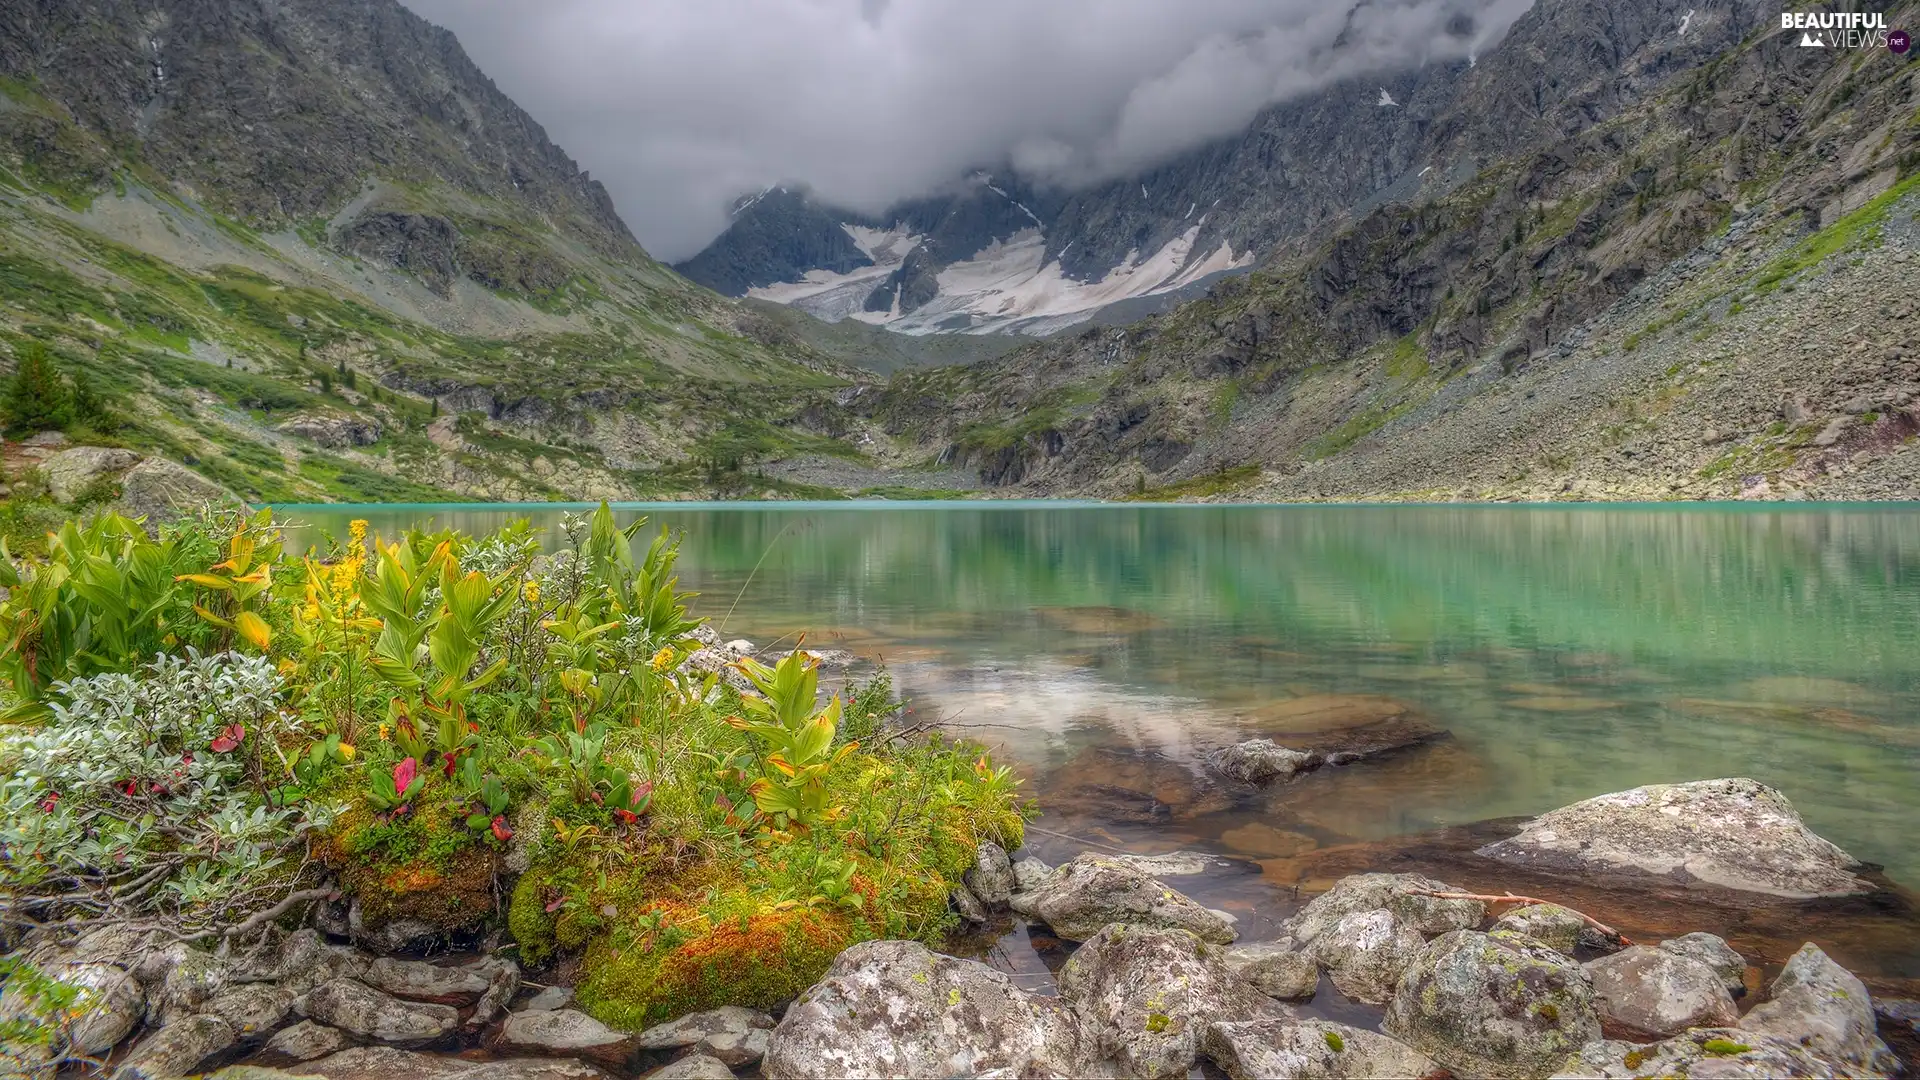 Stones, Plants, clouds, lake, Mountains